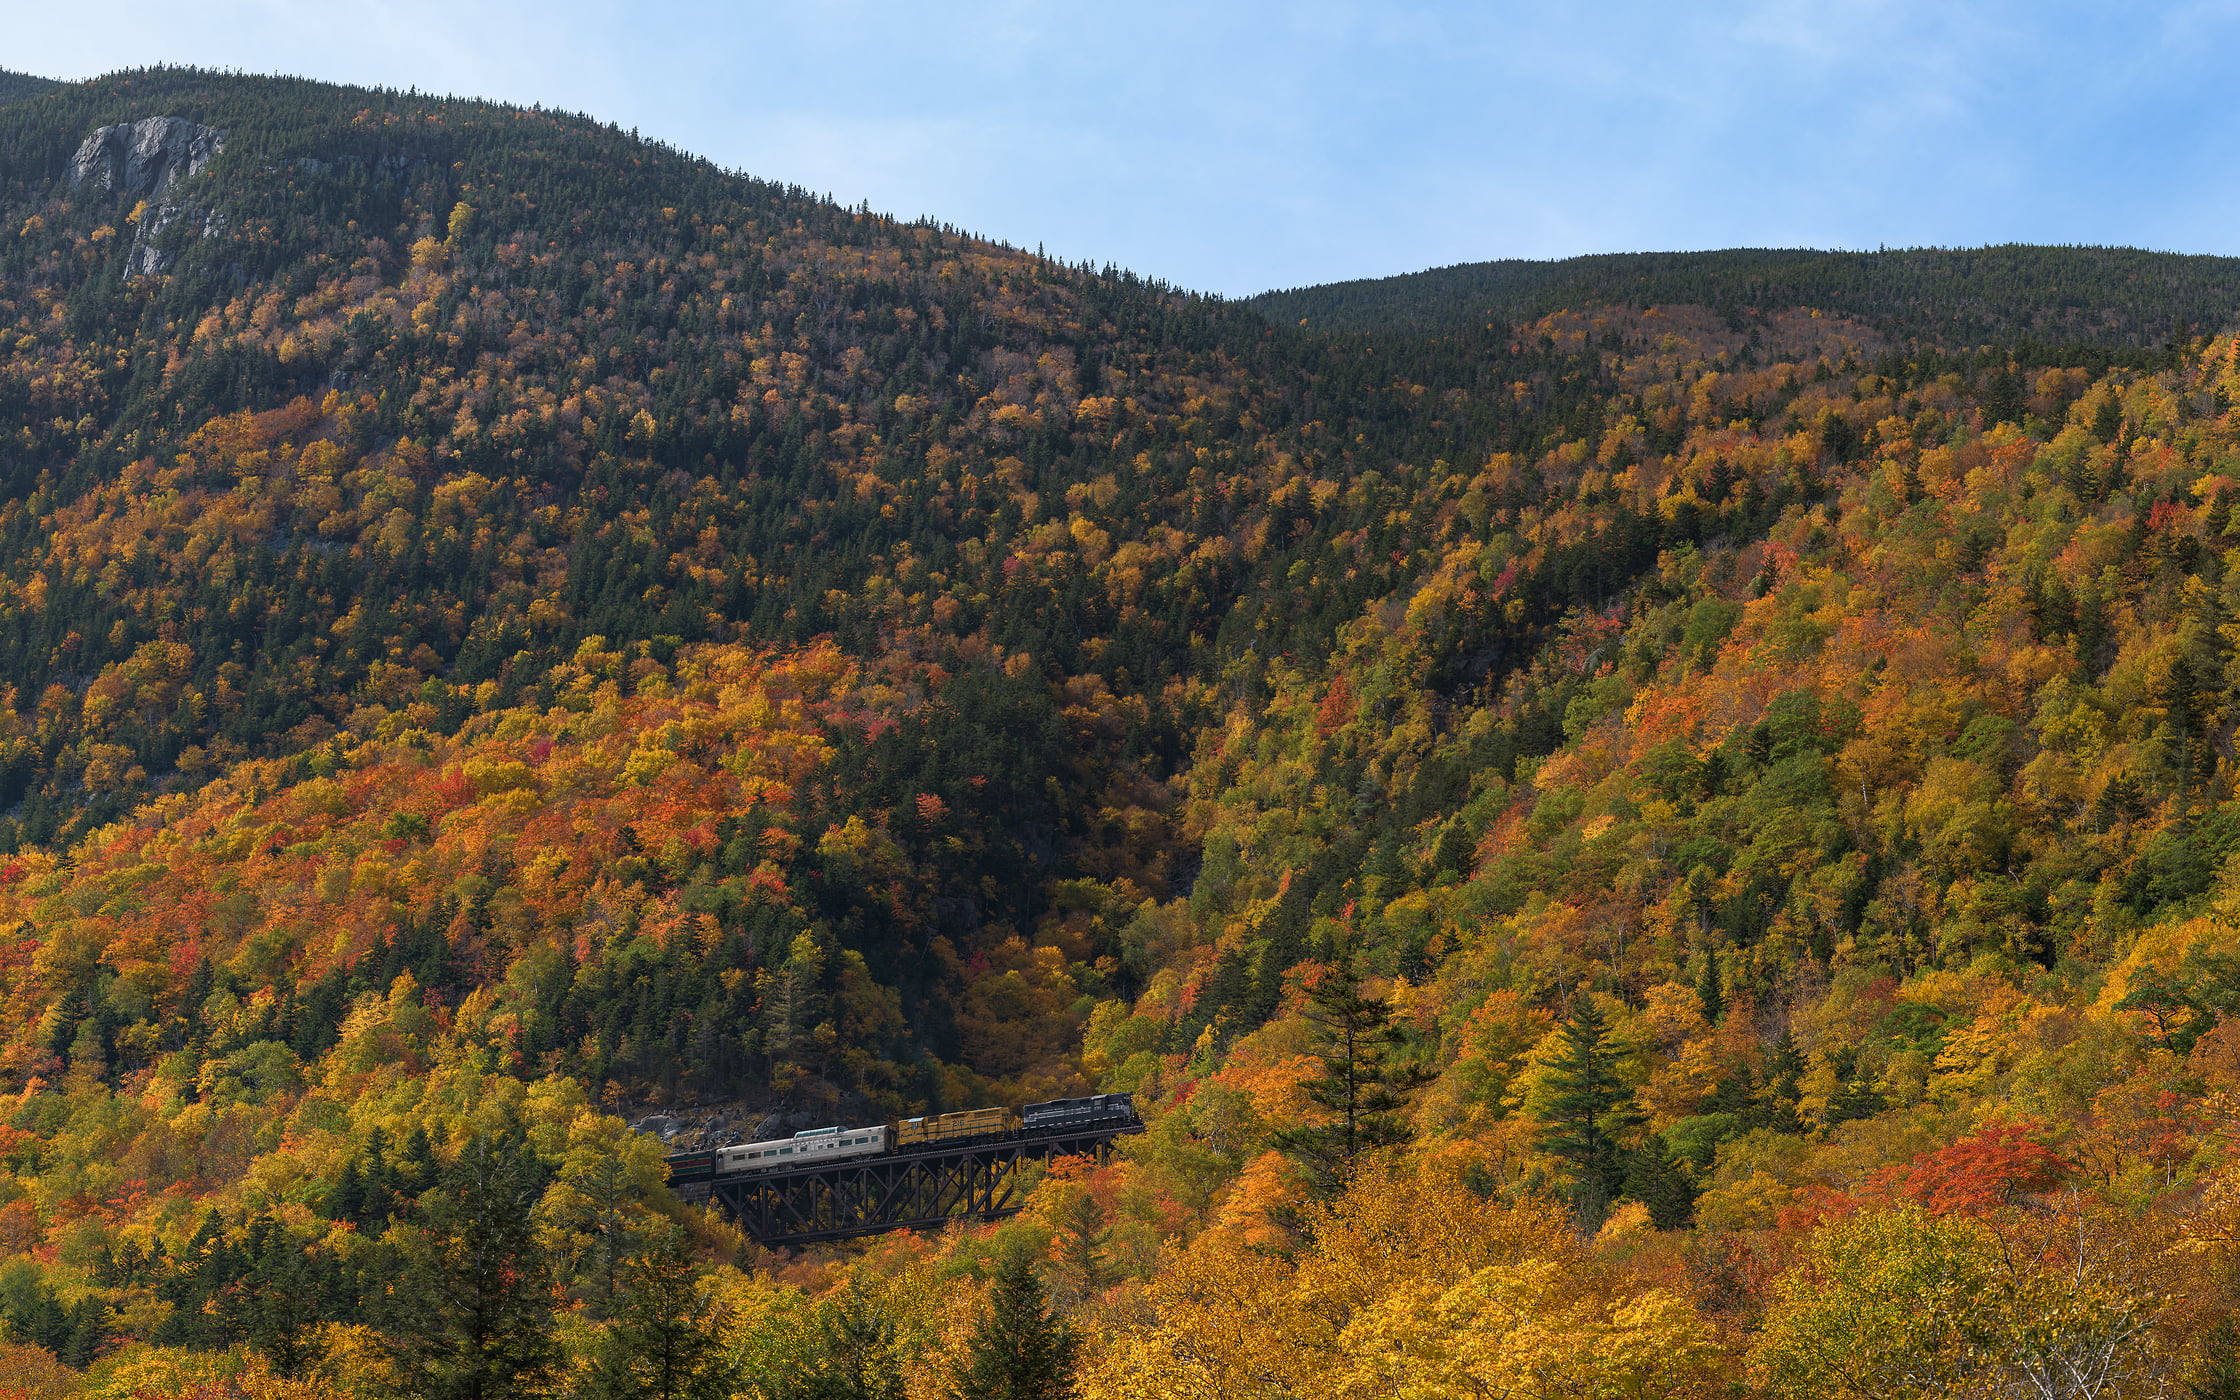 402 megapixels! A very high resolution, large-format VAST photo print of a train amid autumn foliage on a mountain; photograph created by Aaron Priest in Hart's Location, New Hampshire